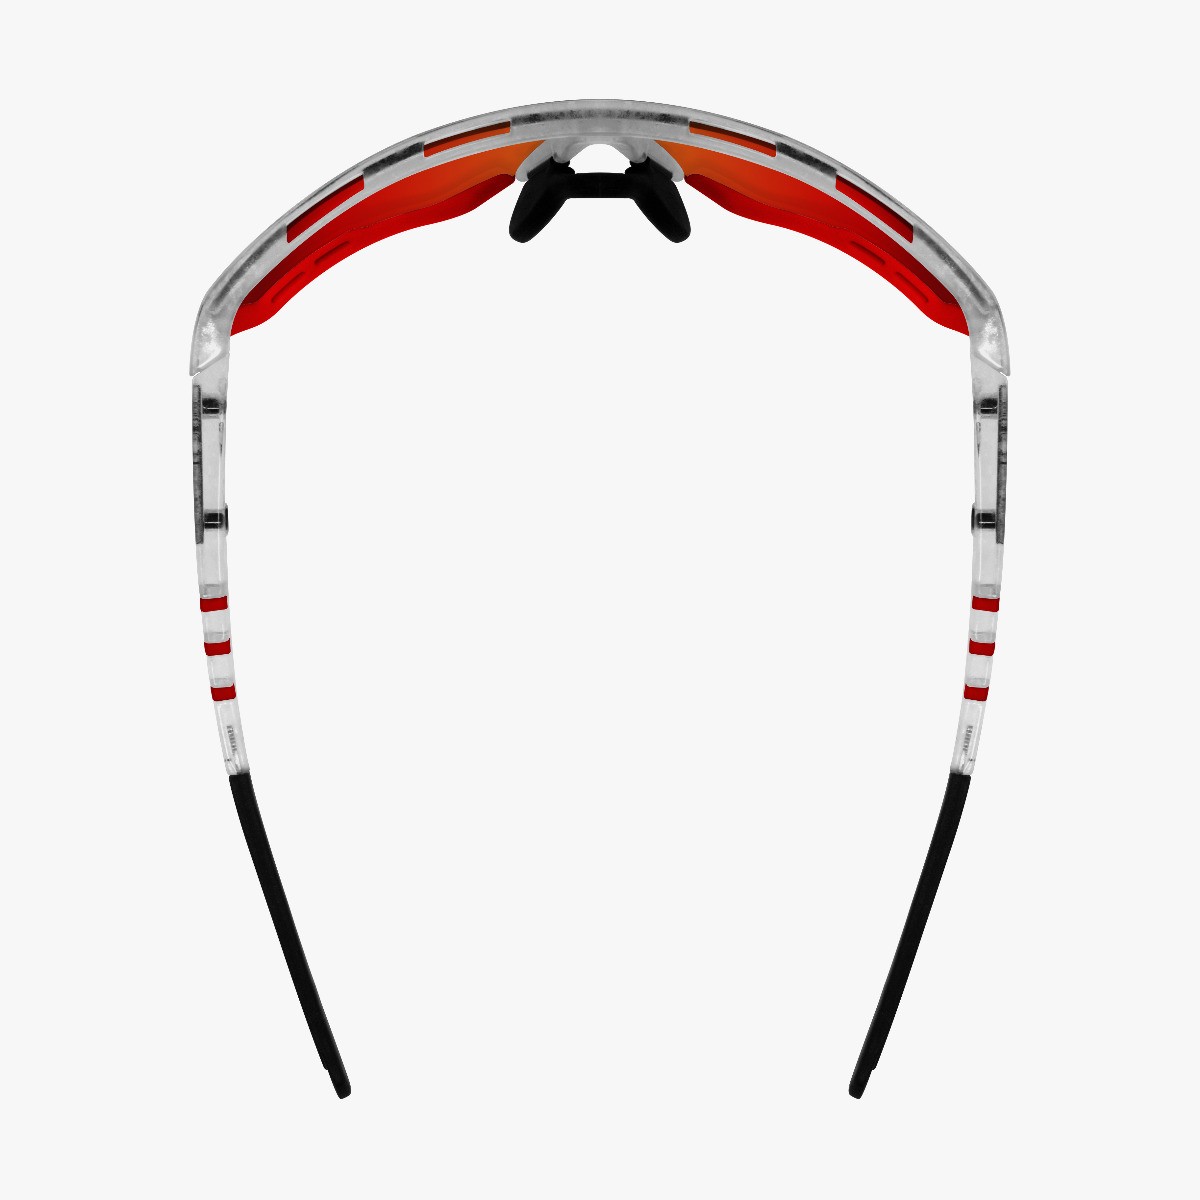 Aerocomfort cycling sunglasses scnxt photochromic frozen frame red lenses EY19160503
